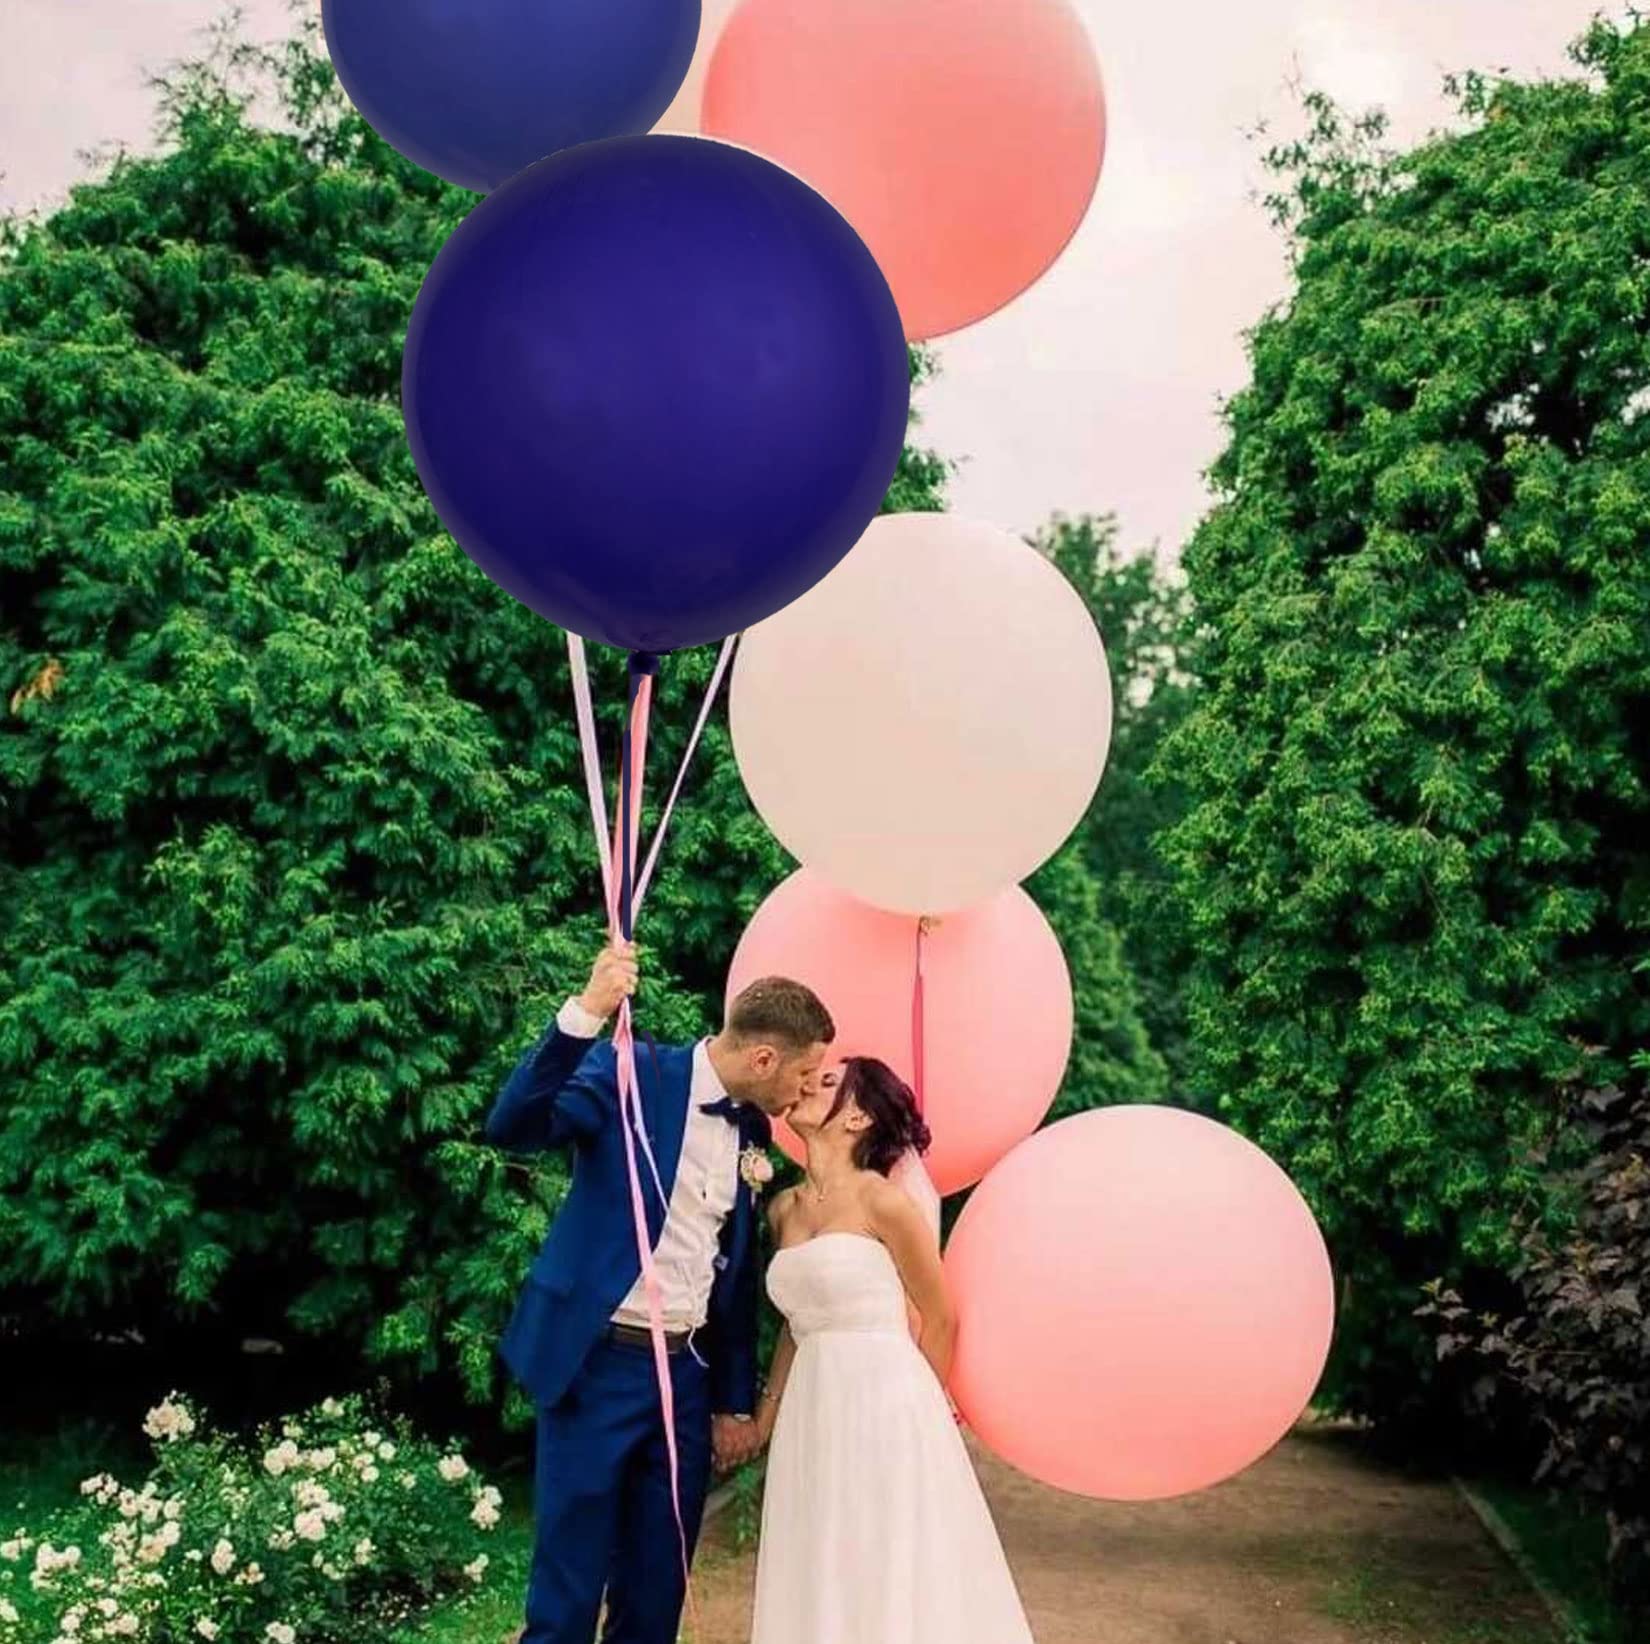 15pcs 24 Inch Balloons Large Assorted Balloons Thick Latex Heavy Duty Balloon Round Big Giant Globos Grandes Huge XXL Jumbo stuffing Colorful Ballons Wedding Birthday Rainbow Party Decorations